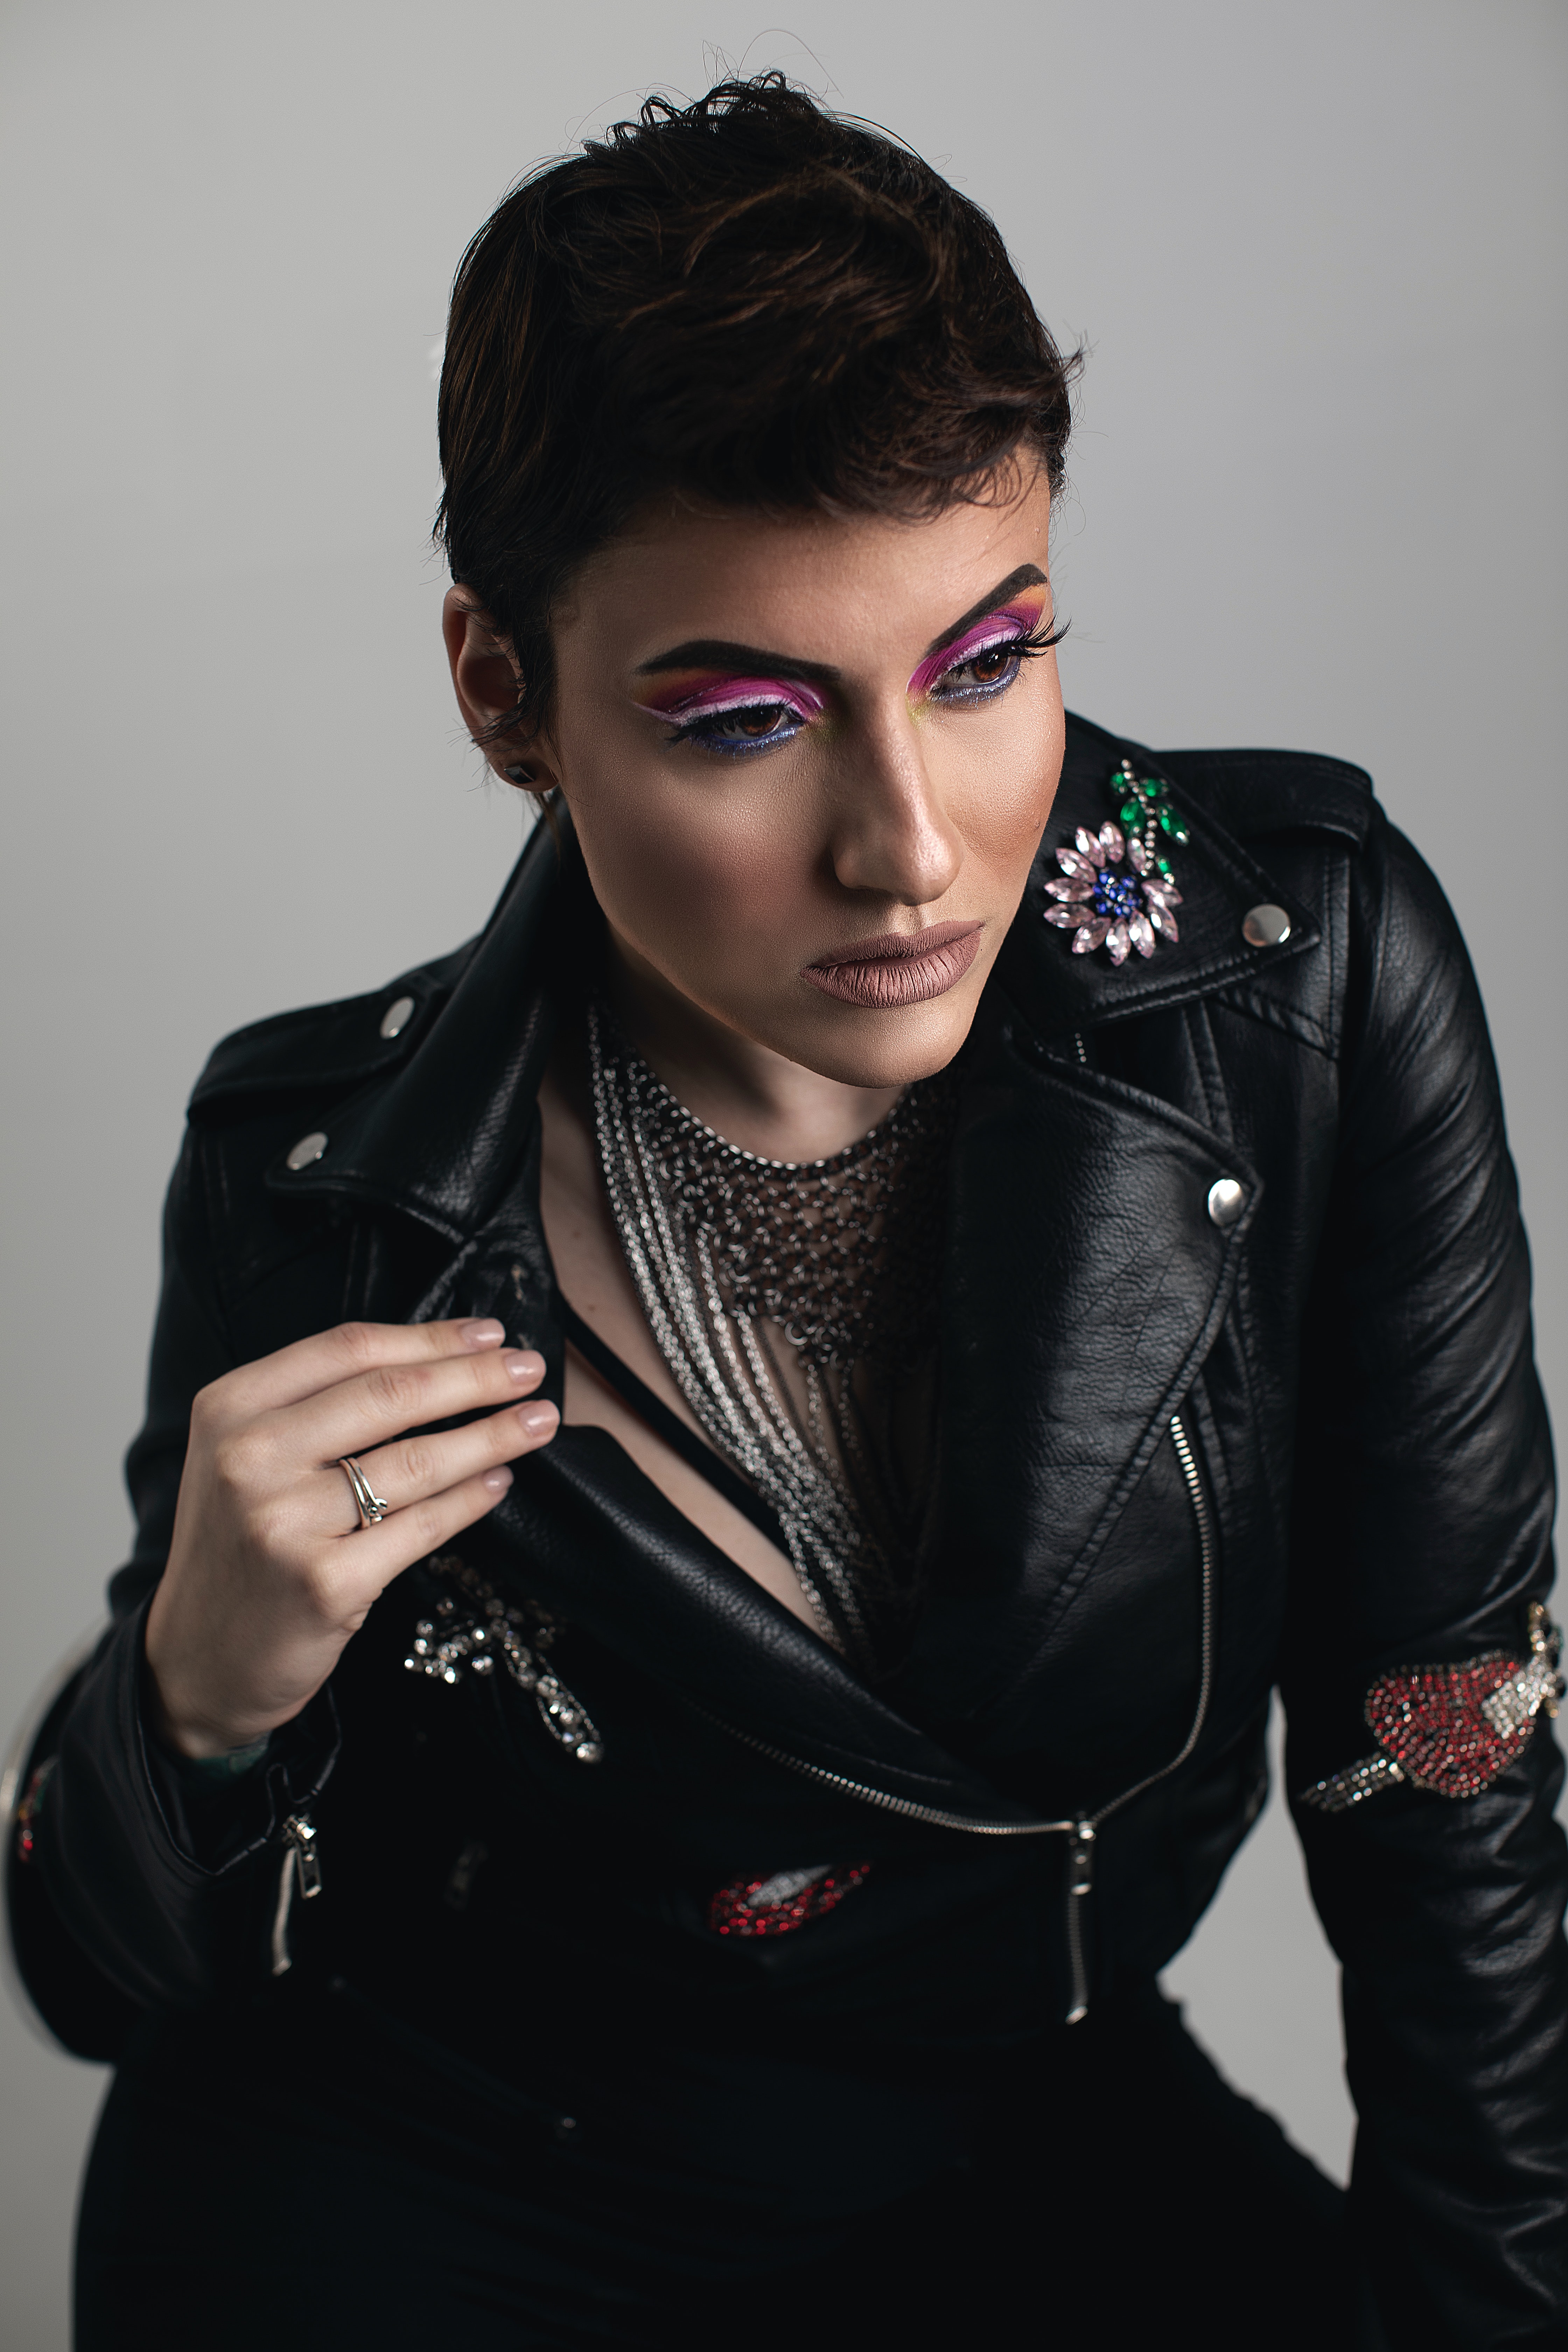 Editorial photo of woman with short dark hair in a leather jacket with a statement necklace